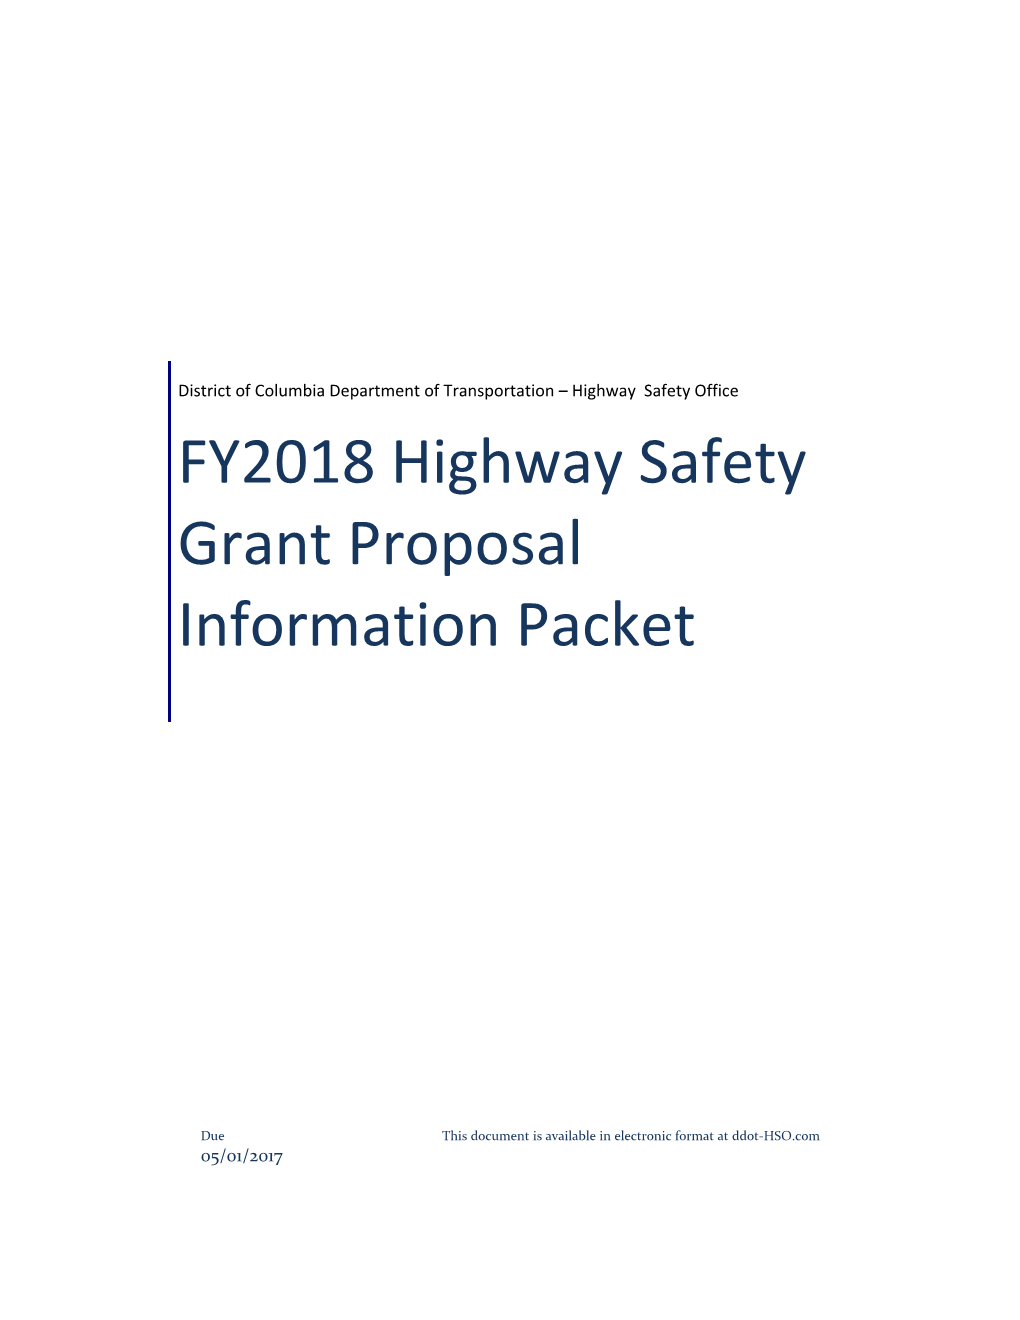 FFY2012 Highway Safety Grant Proposal Information Packet